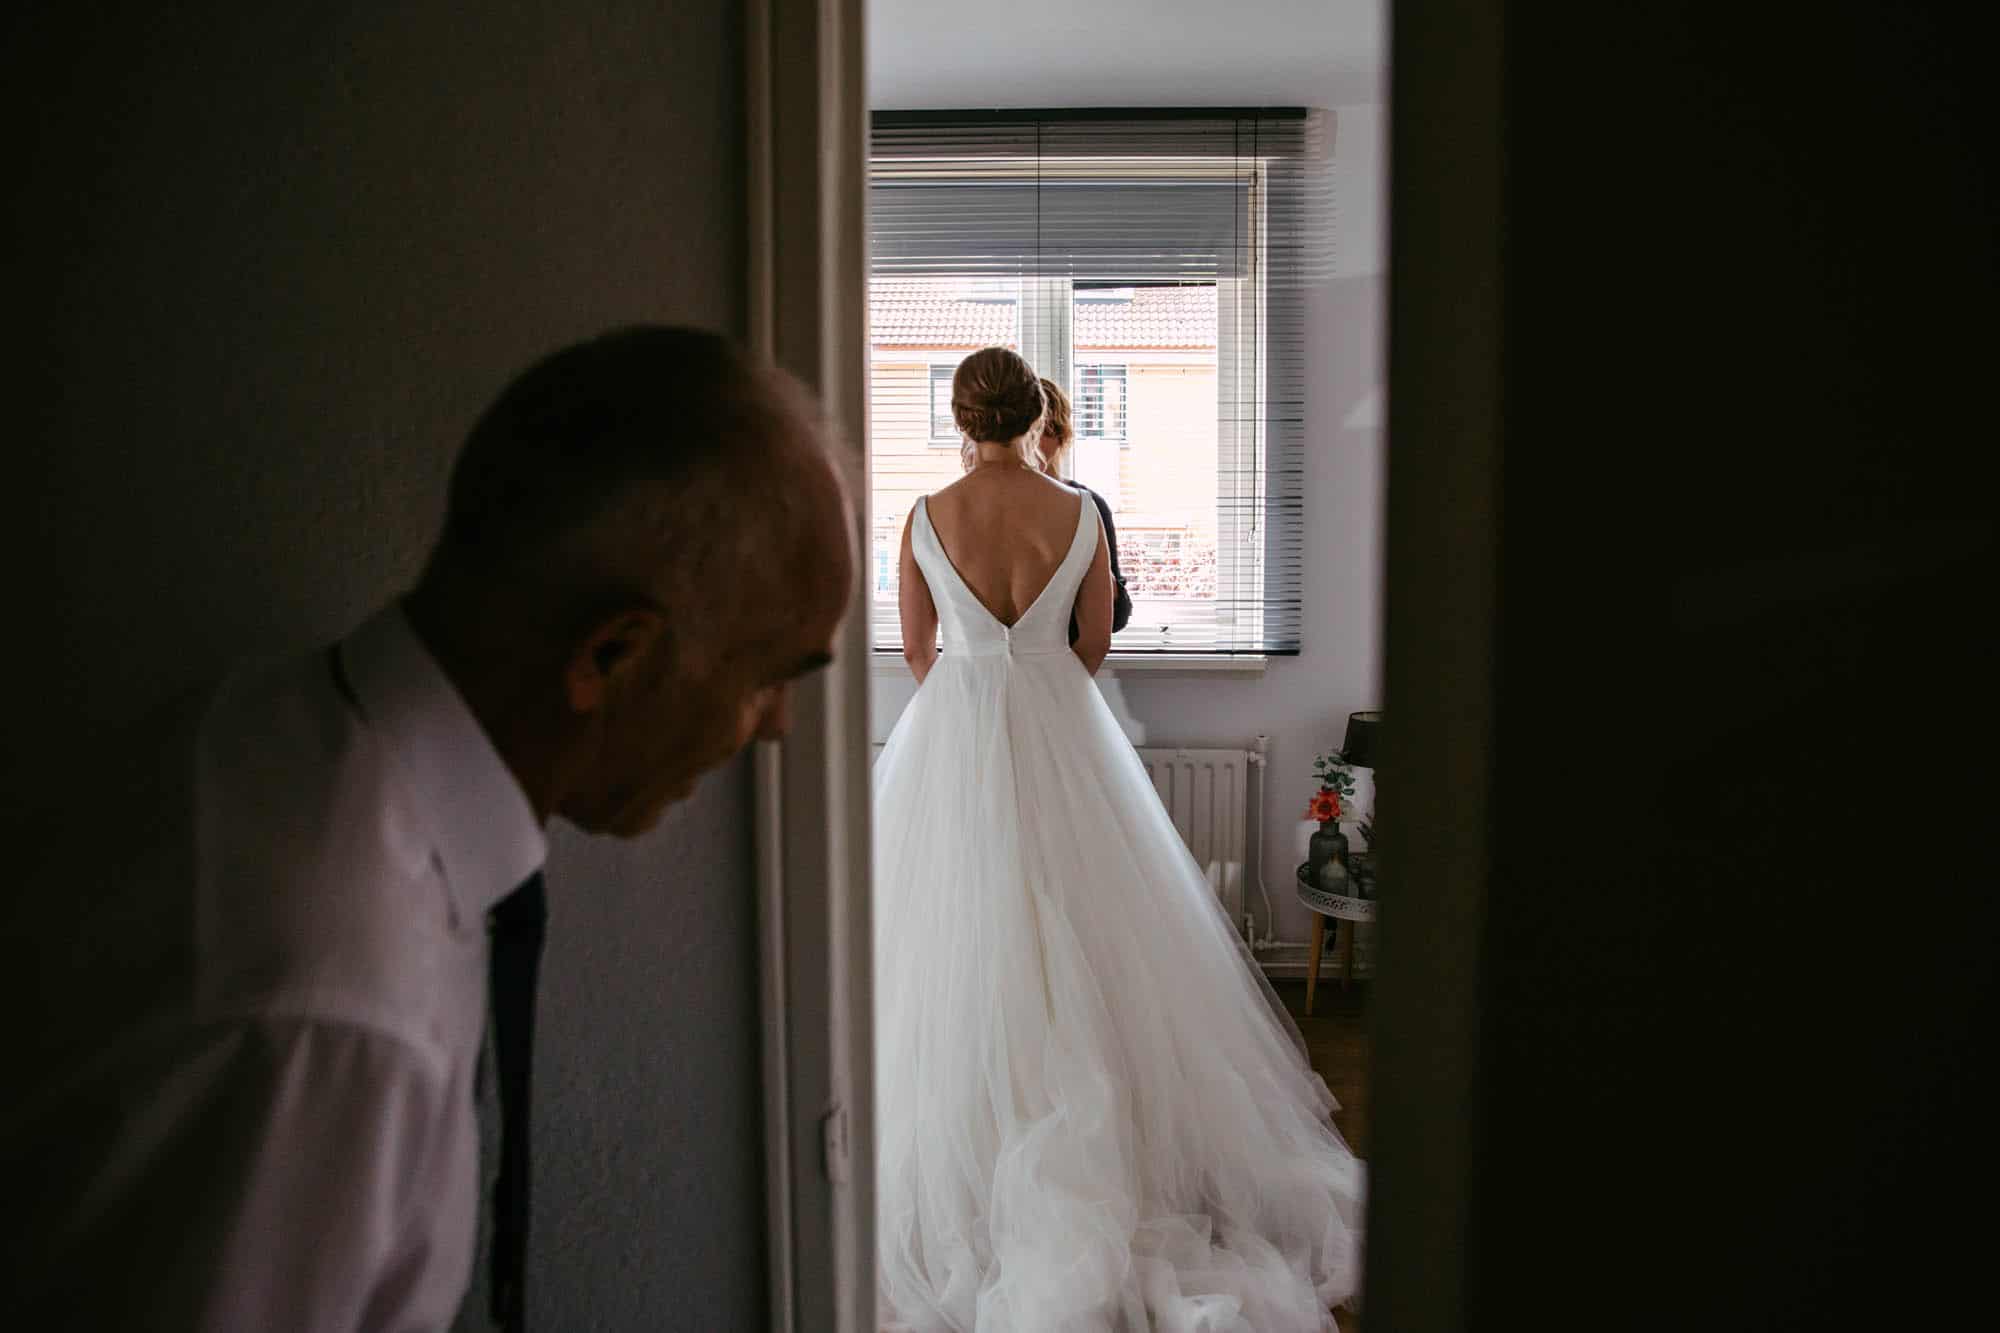 A bride stands in front of a mirror and looks at her wedding dress.